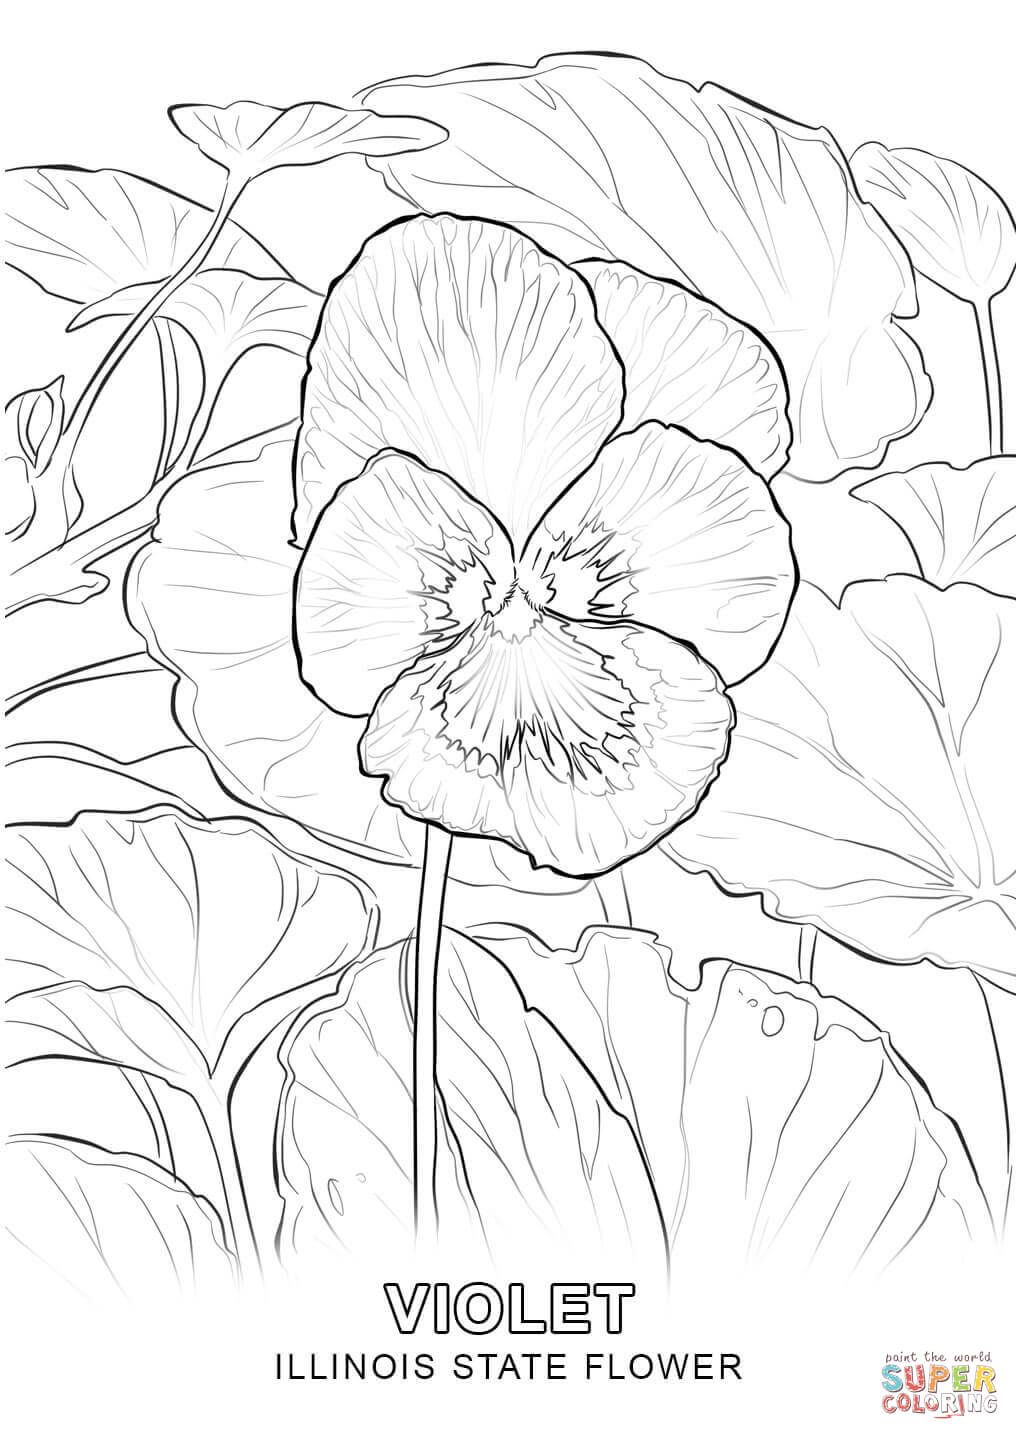 Illinois State Flower coloring page | Free Printable Coloring ...